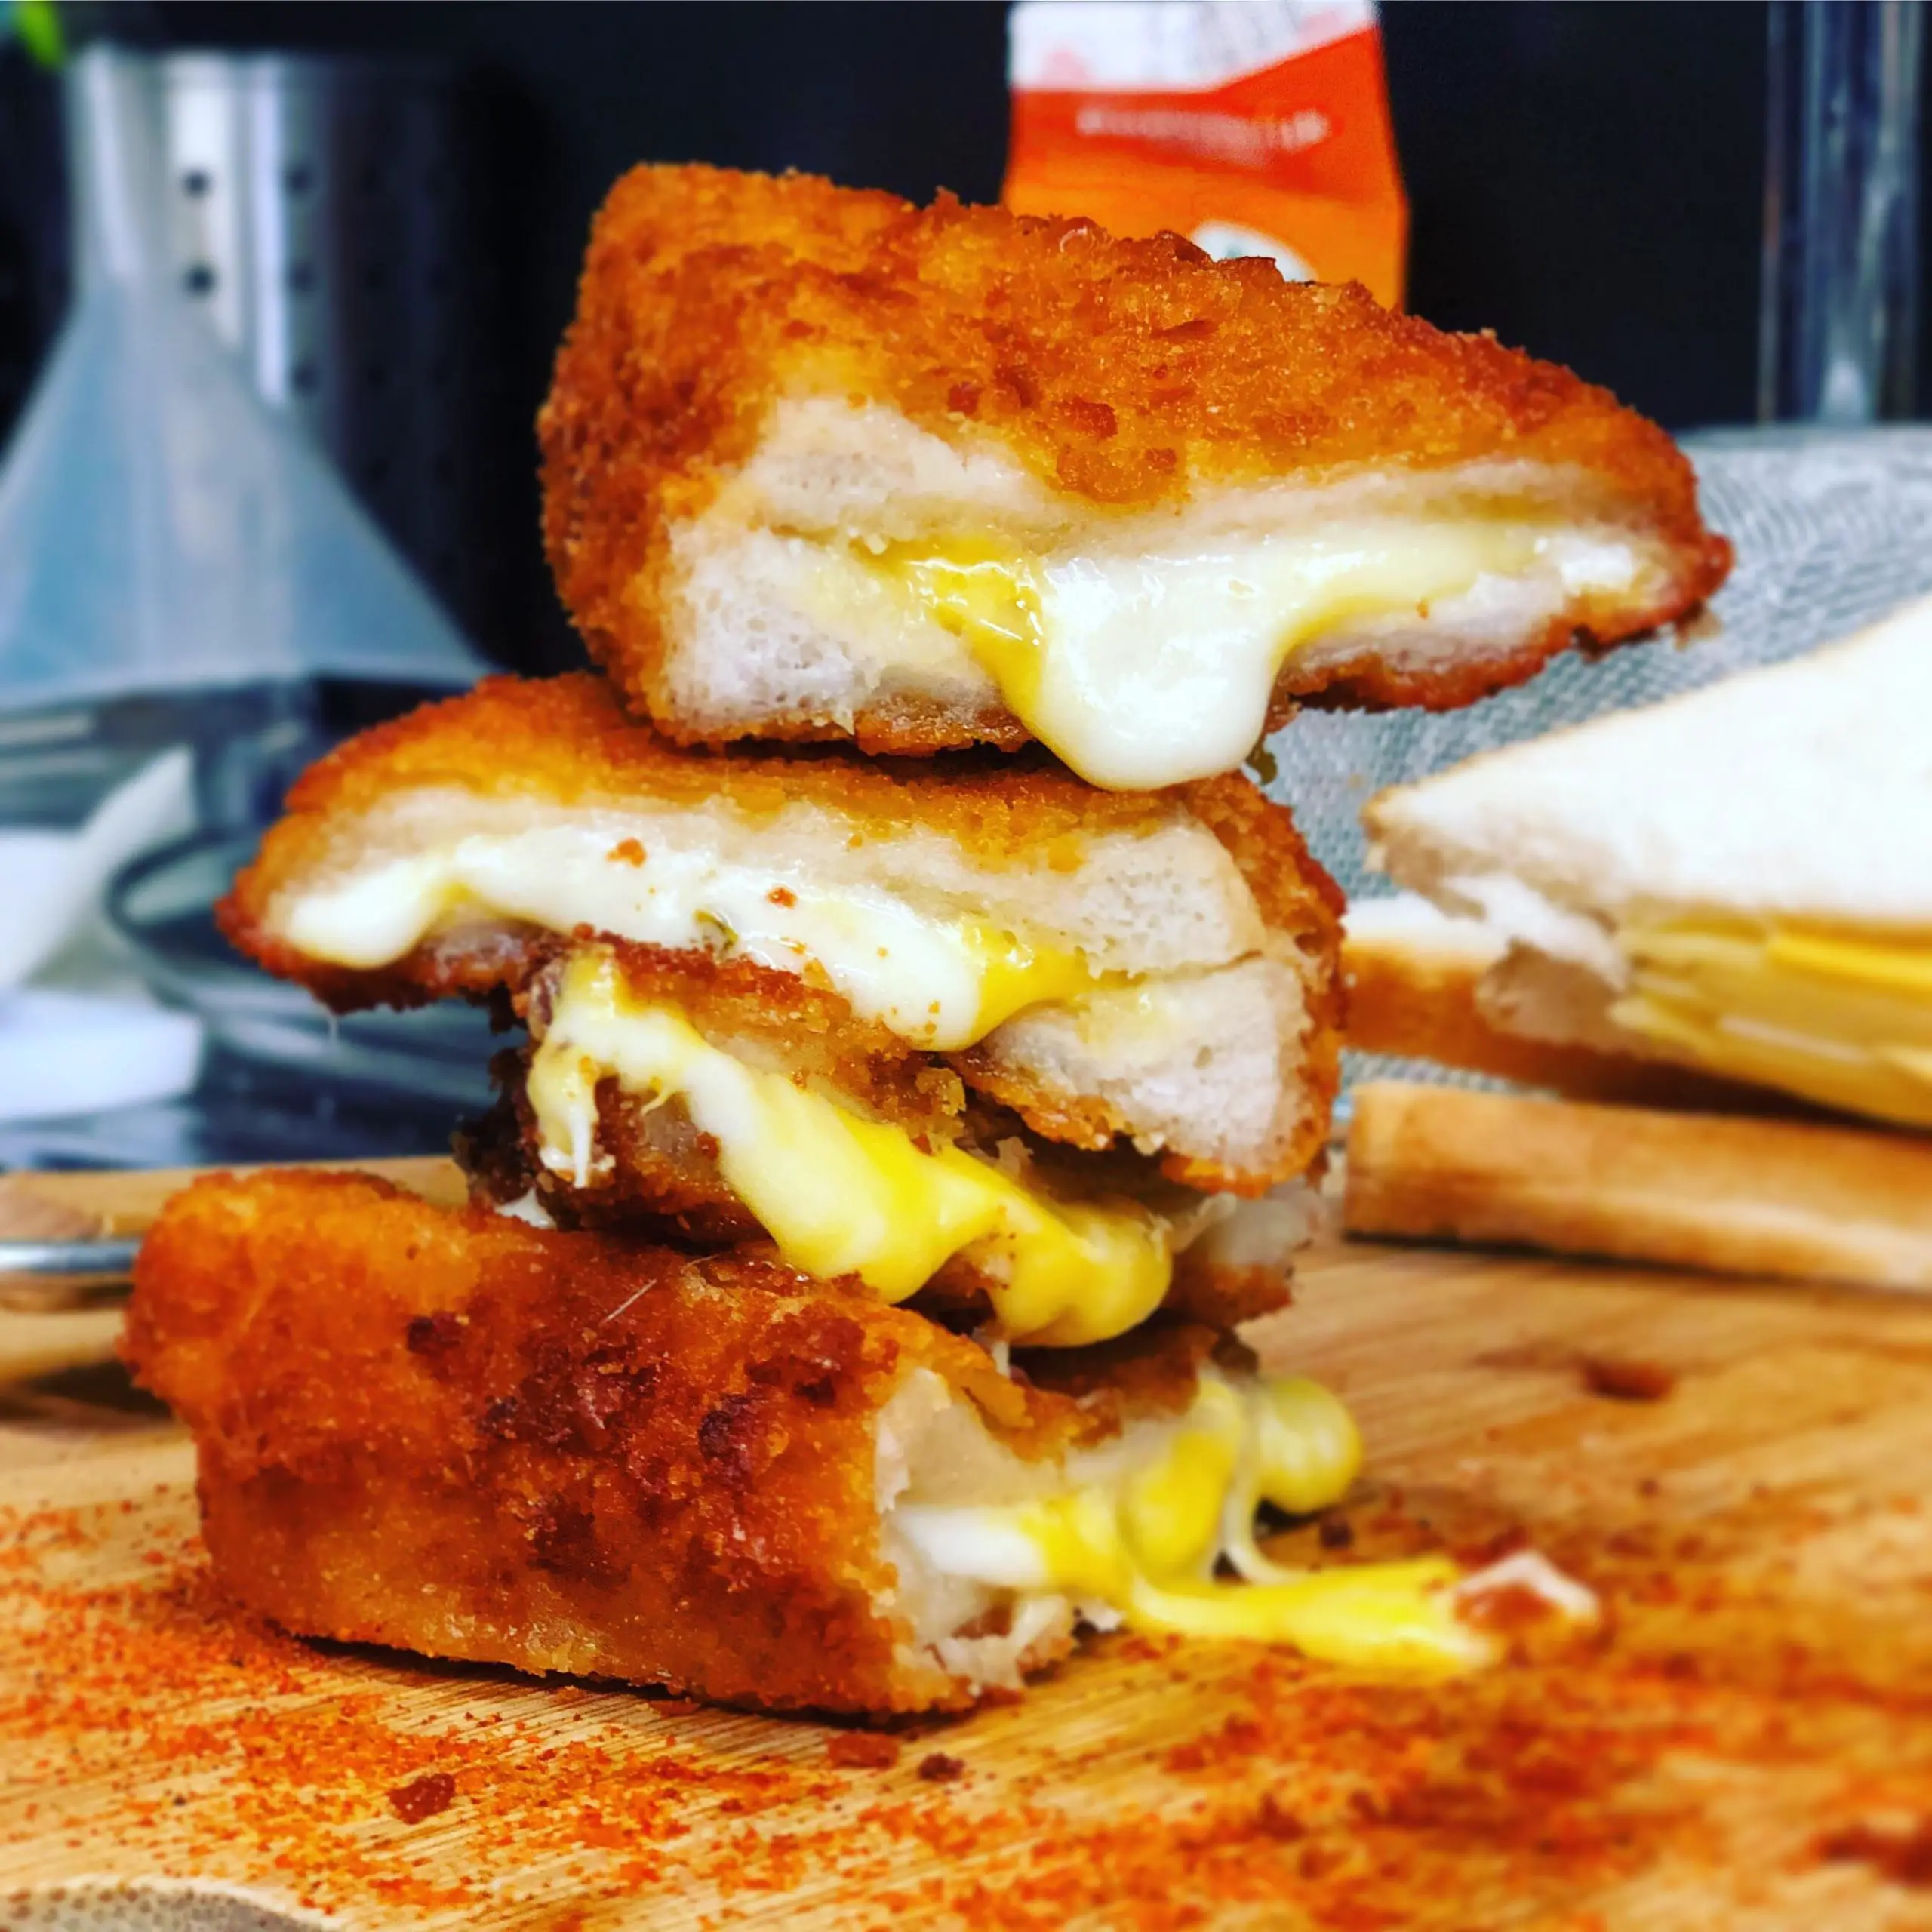 Made a Nashville Hot spiced, Deep Fried Grilled Cheese : eatsandwiches